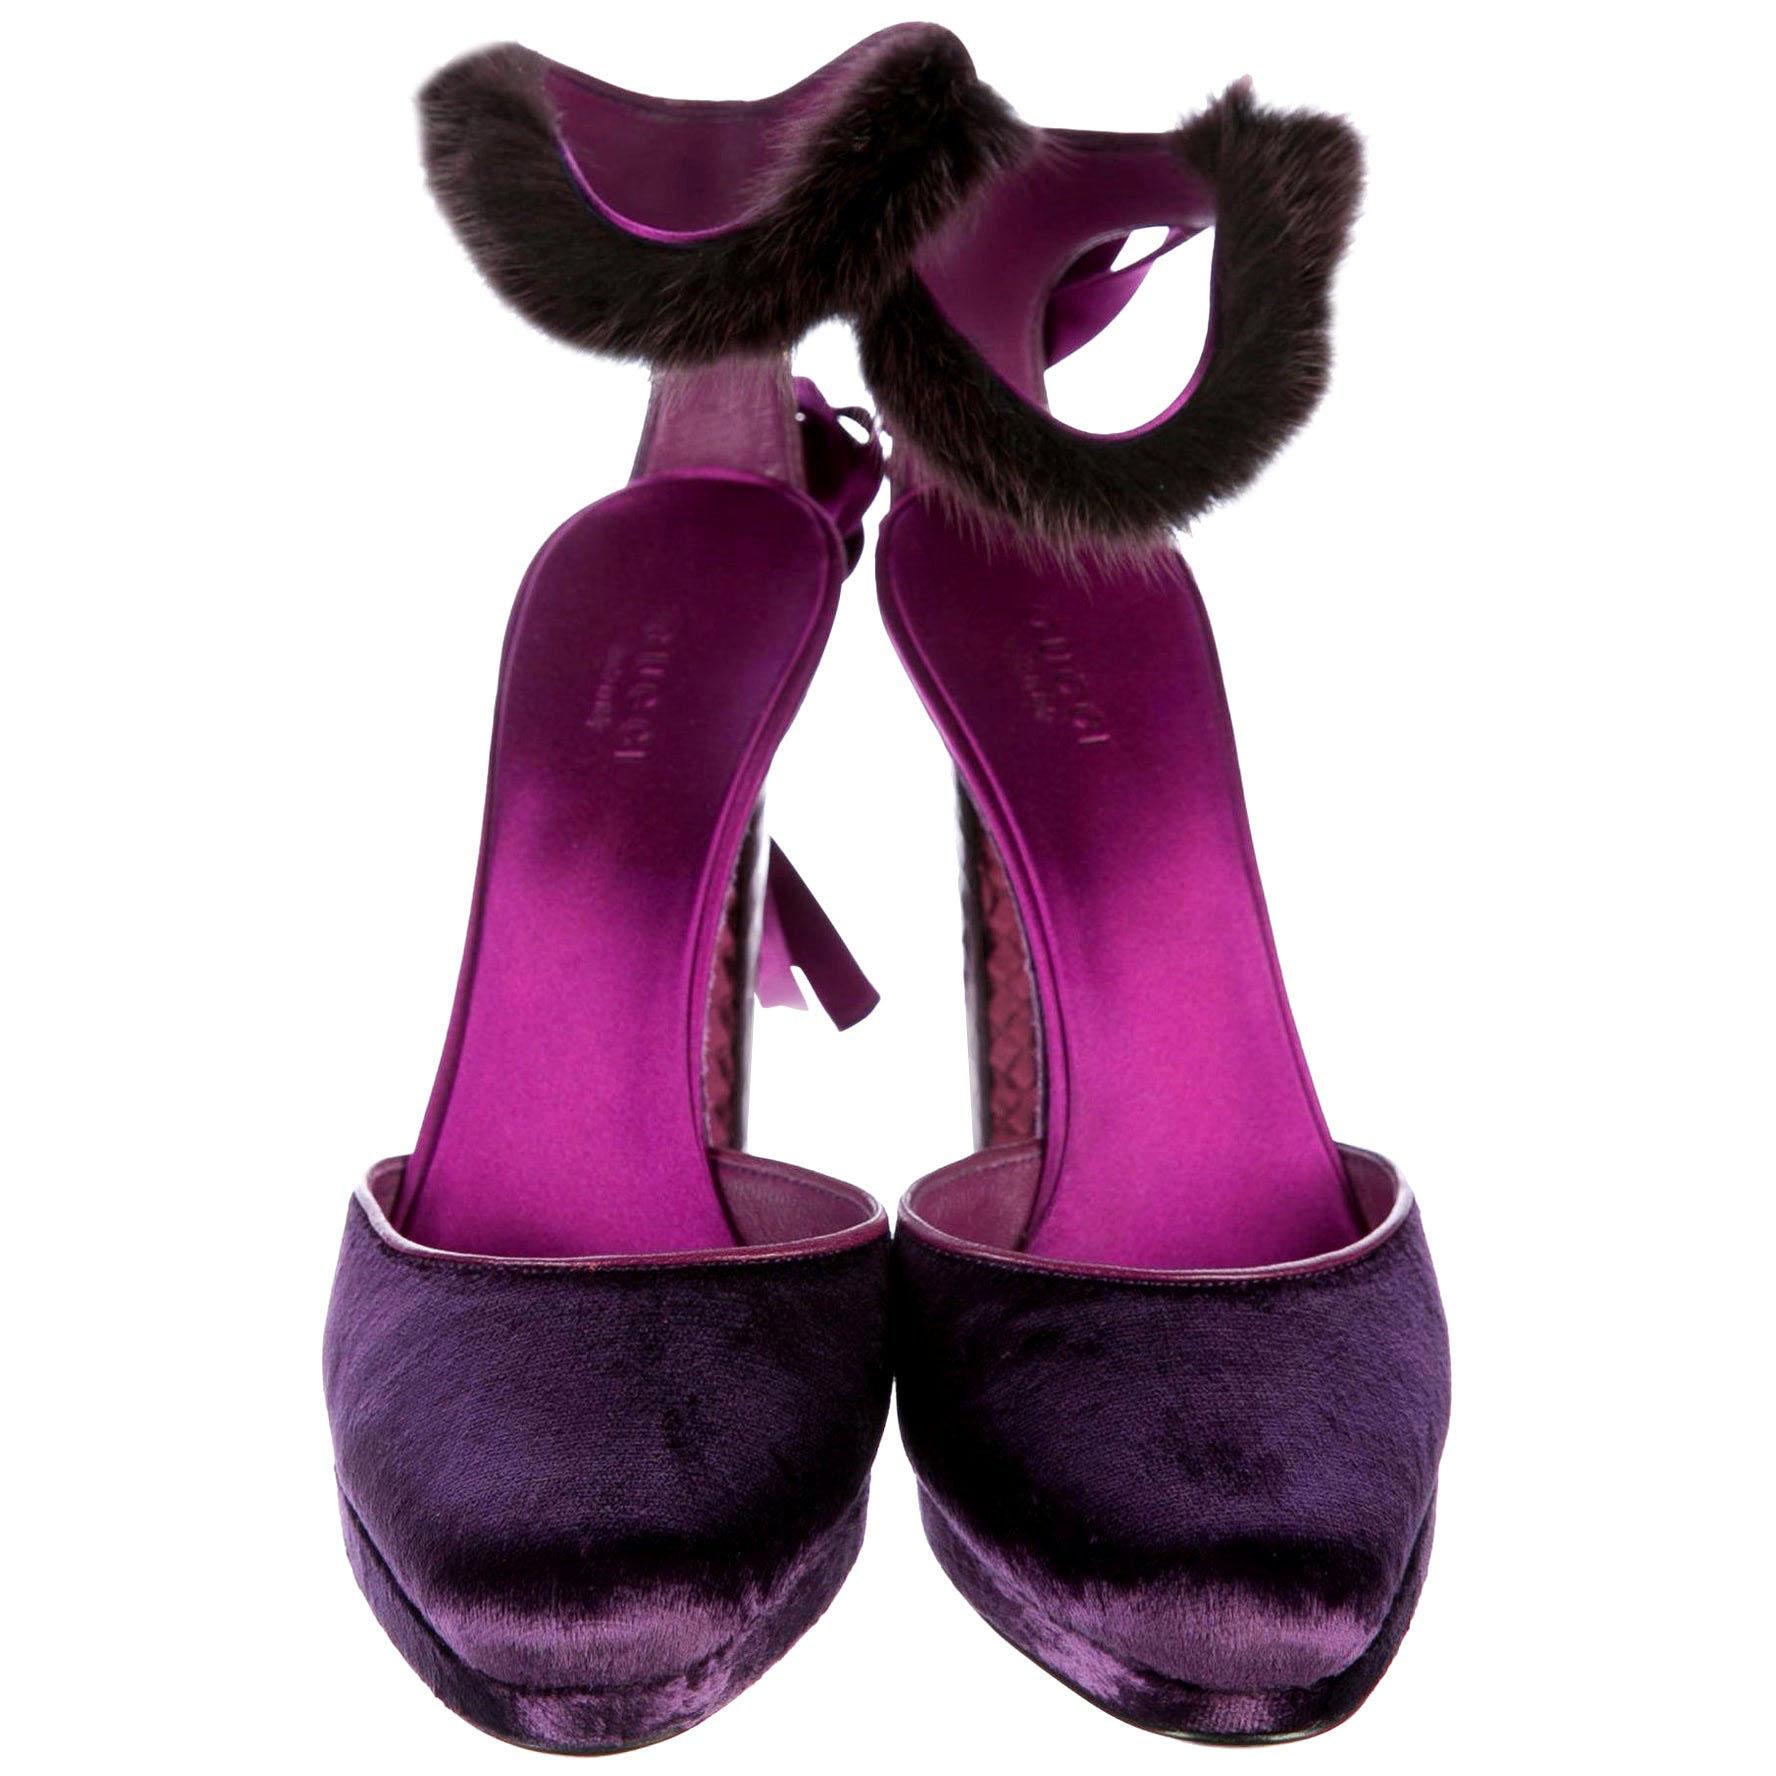 New Tom Ford For Gucci Farewell Collection Mink Python Velvet Heels SZ 8.5